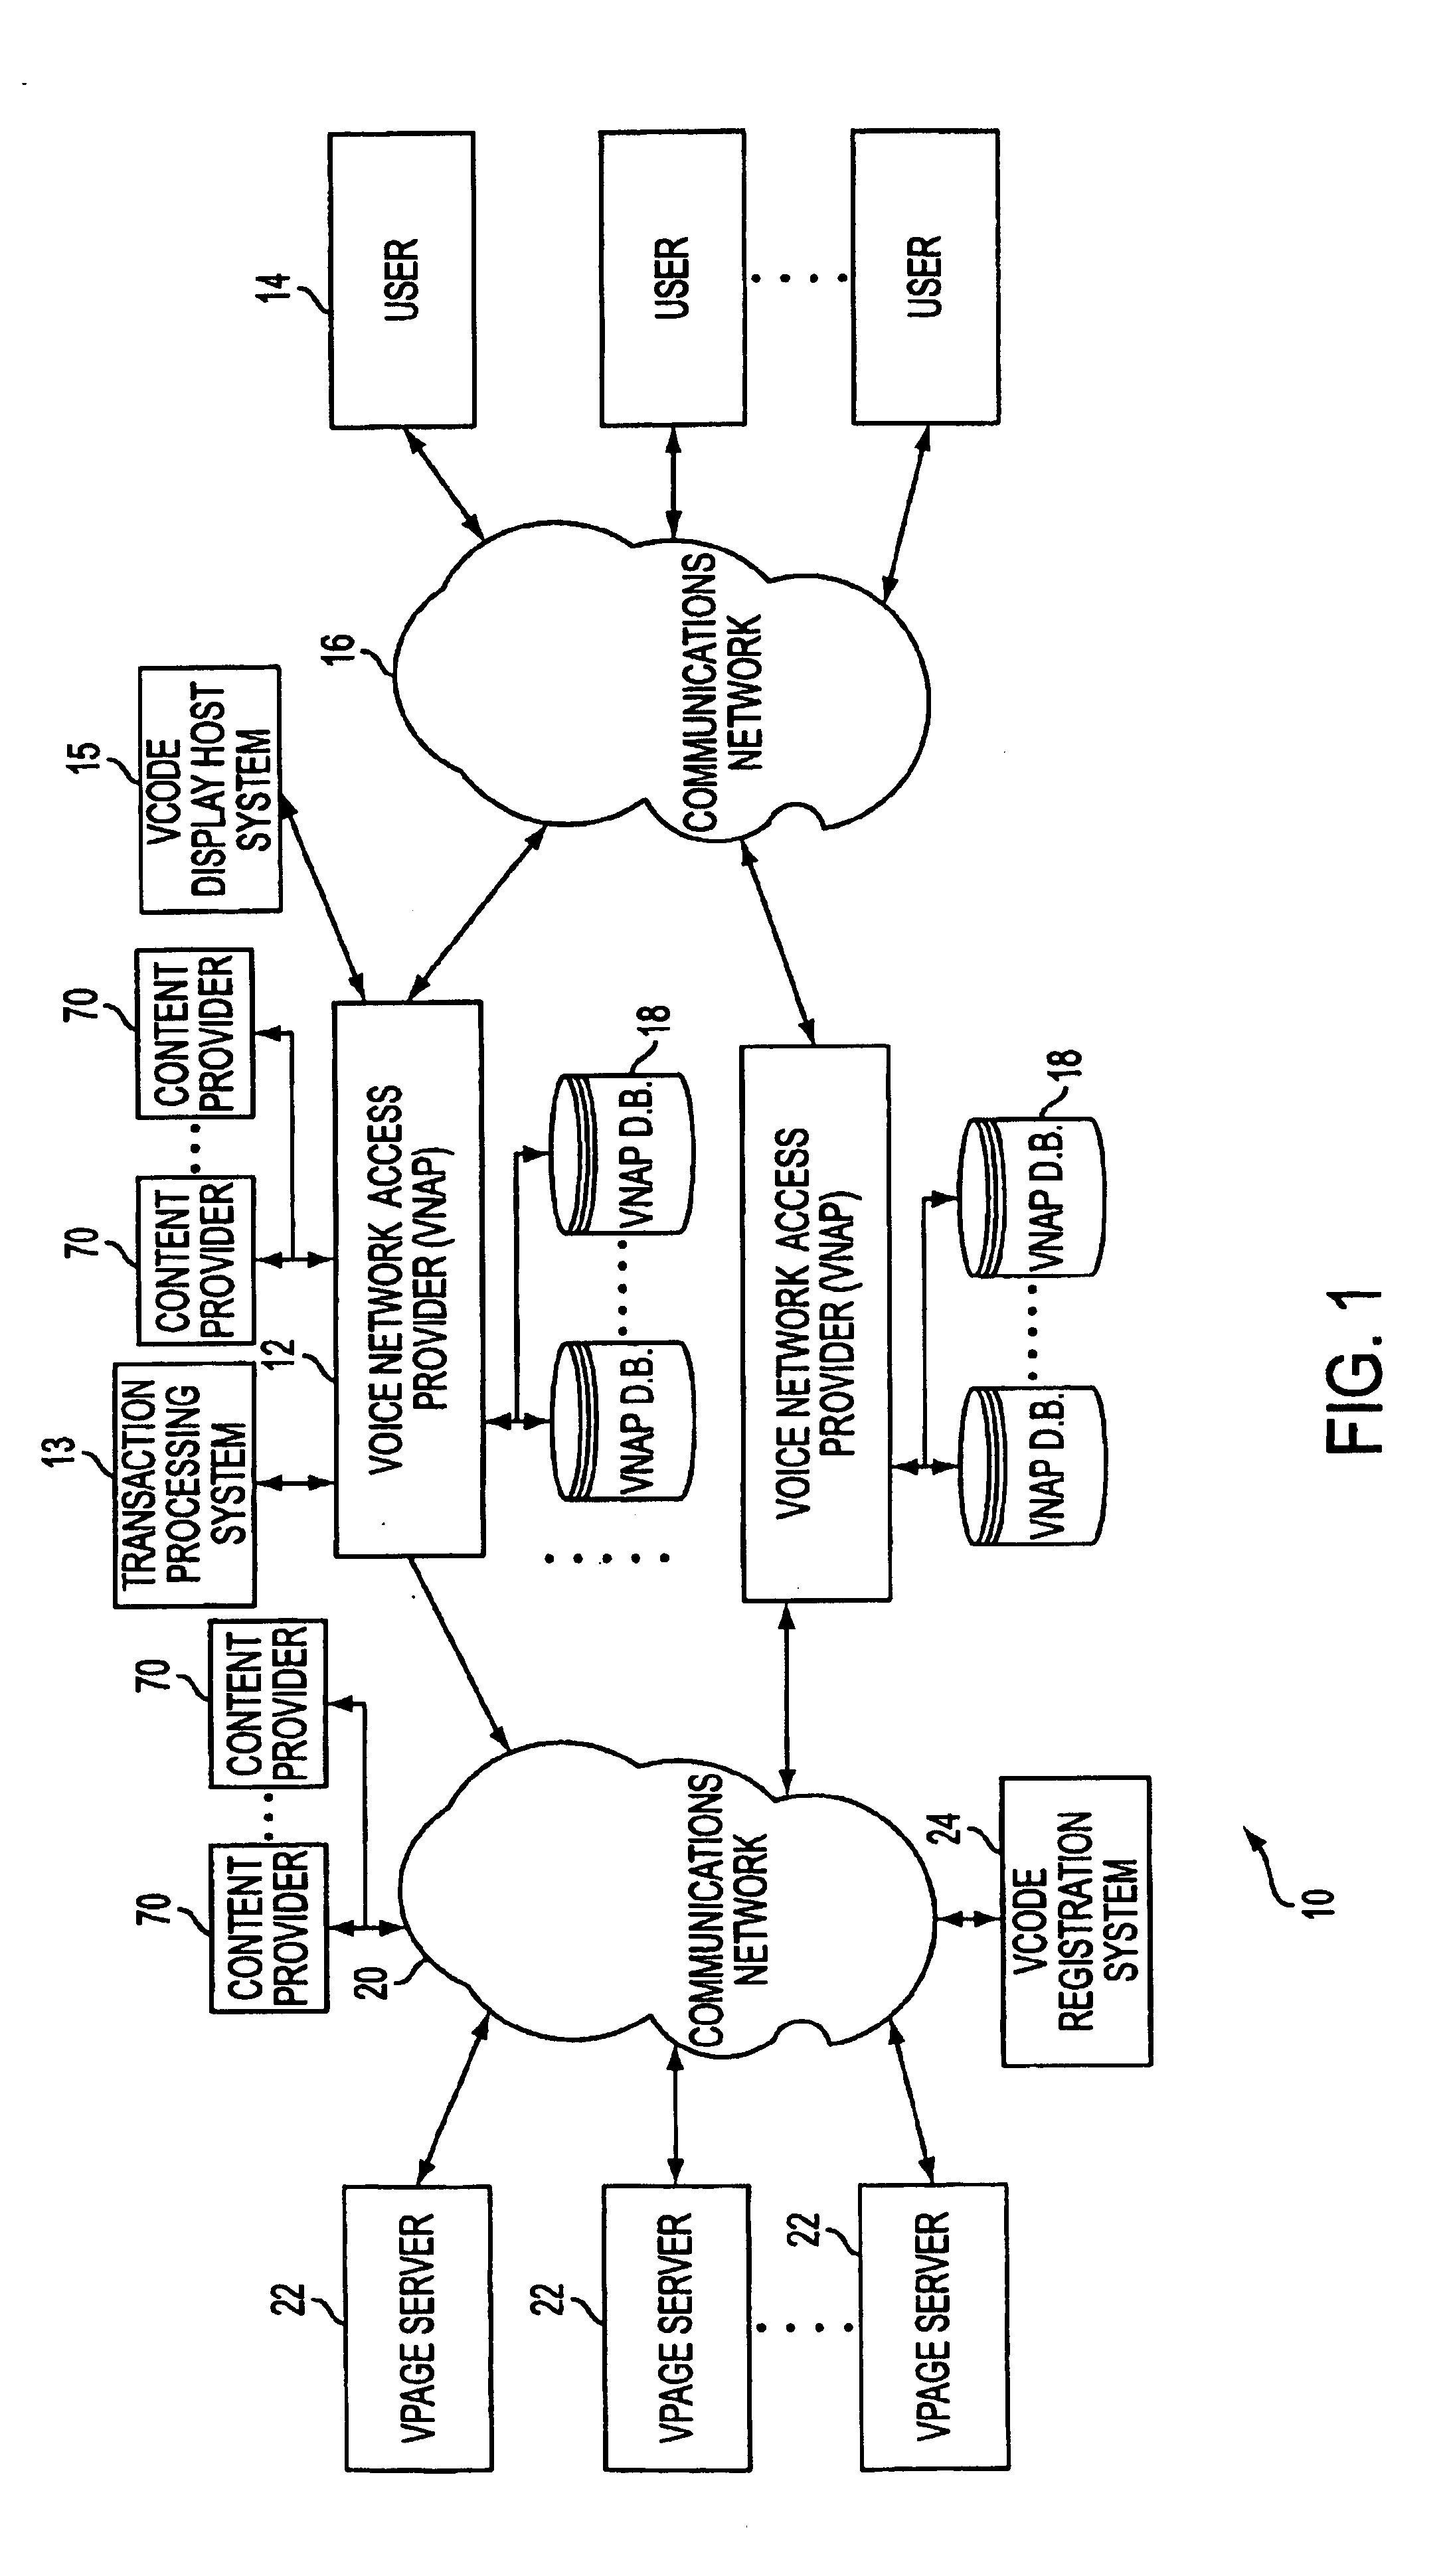 Revenue generation method for use with voice network access provider system and method